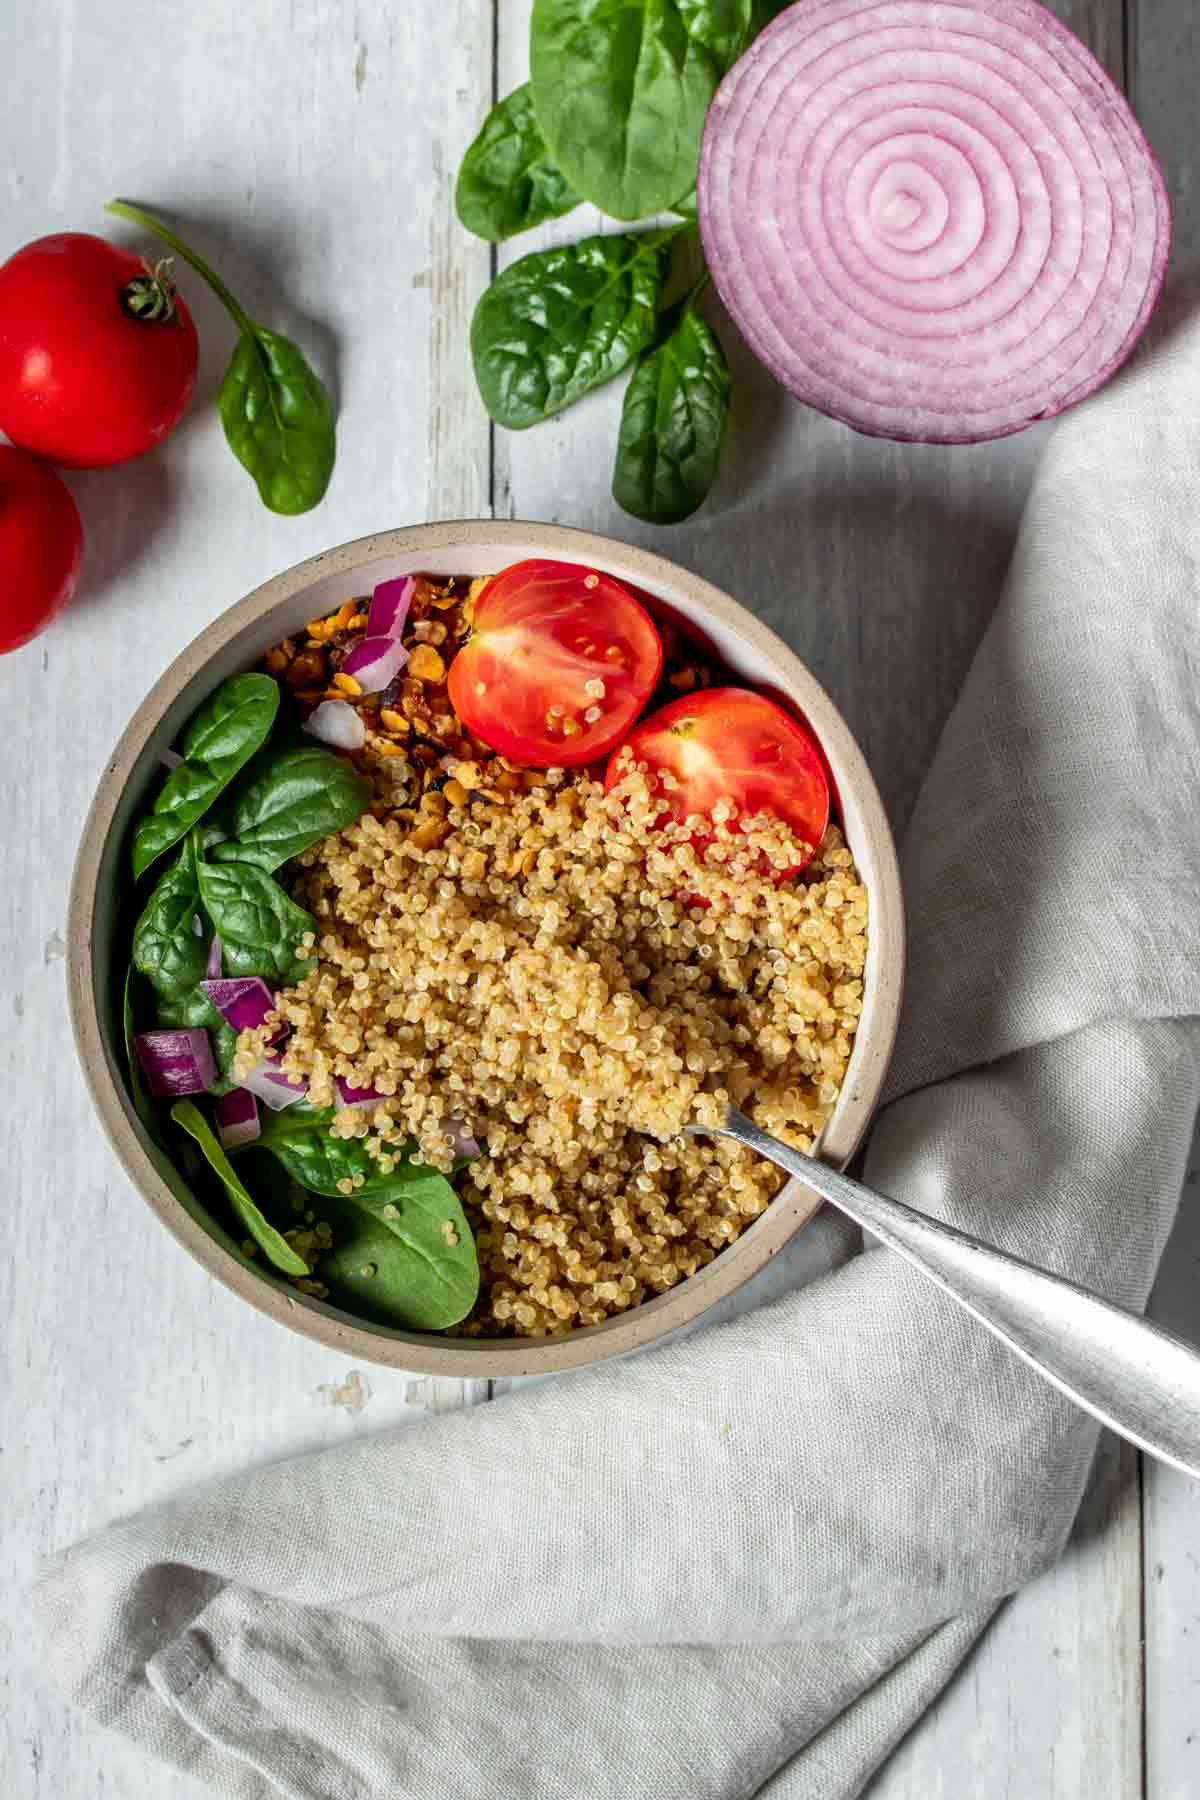 Top view of a white wooden surface with a bowl filled with quinoa, spinach and tomatoes next to more spinach and tomatoes and half a red onion.